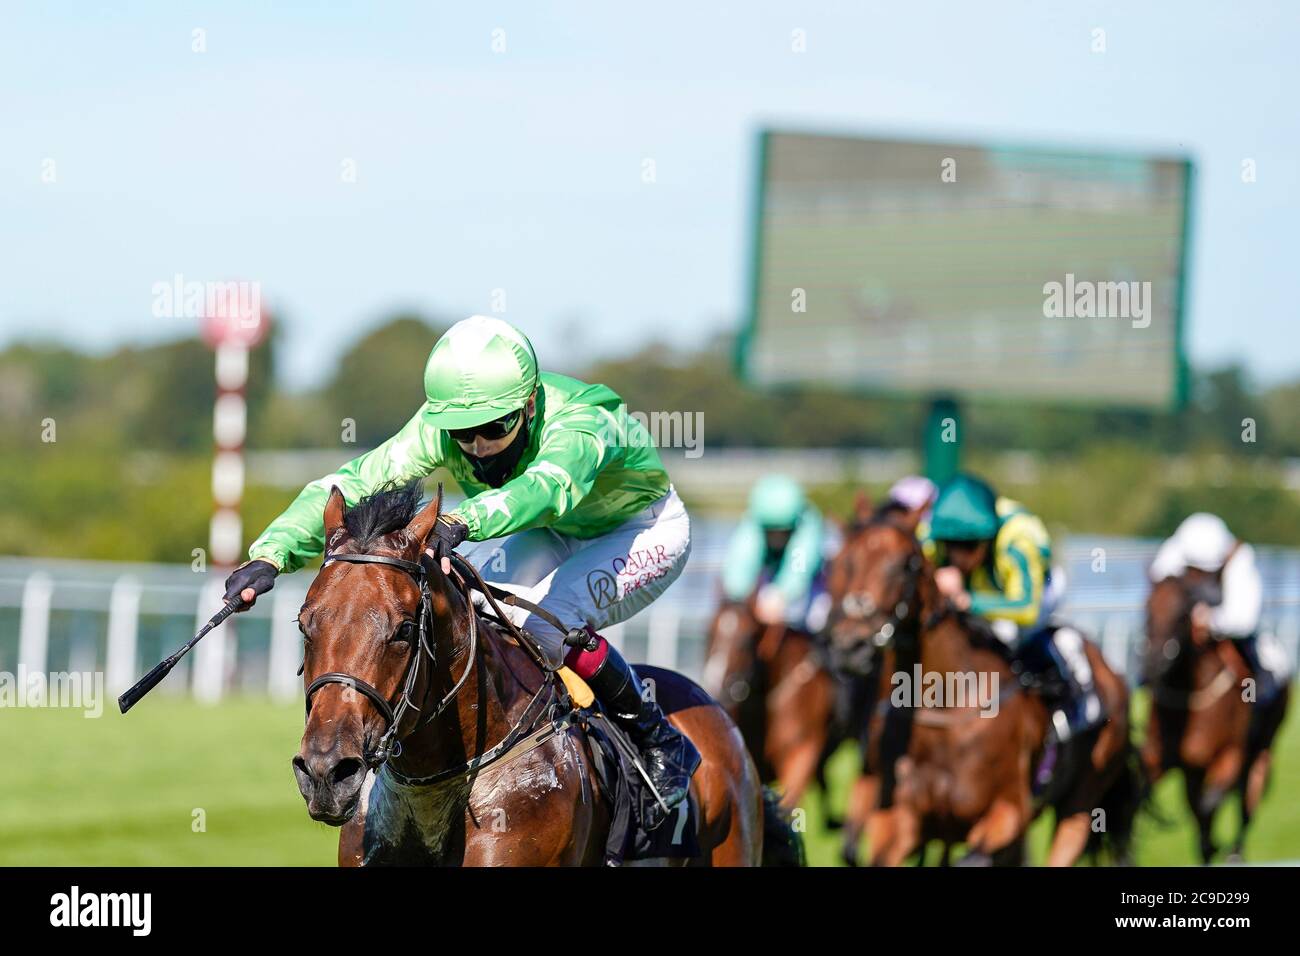 Aclam Express ridden by Oisin Murphy wins The Tatler Nursery during day three of the Goodwood Festival at Goodwood Racecourse, Chichester. Stock Photo